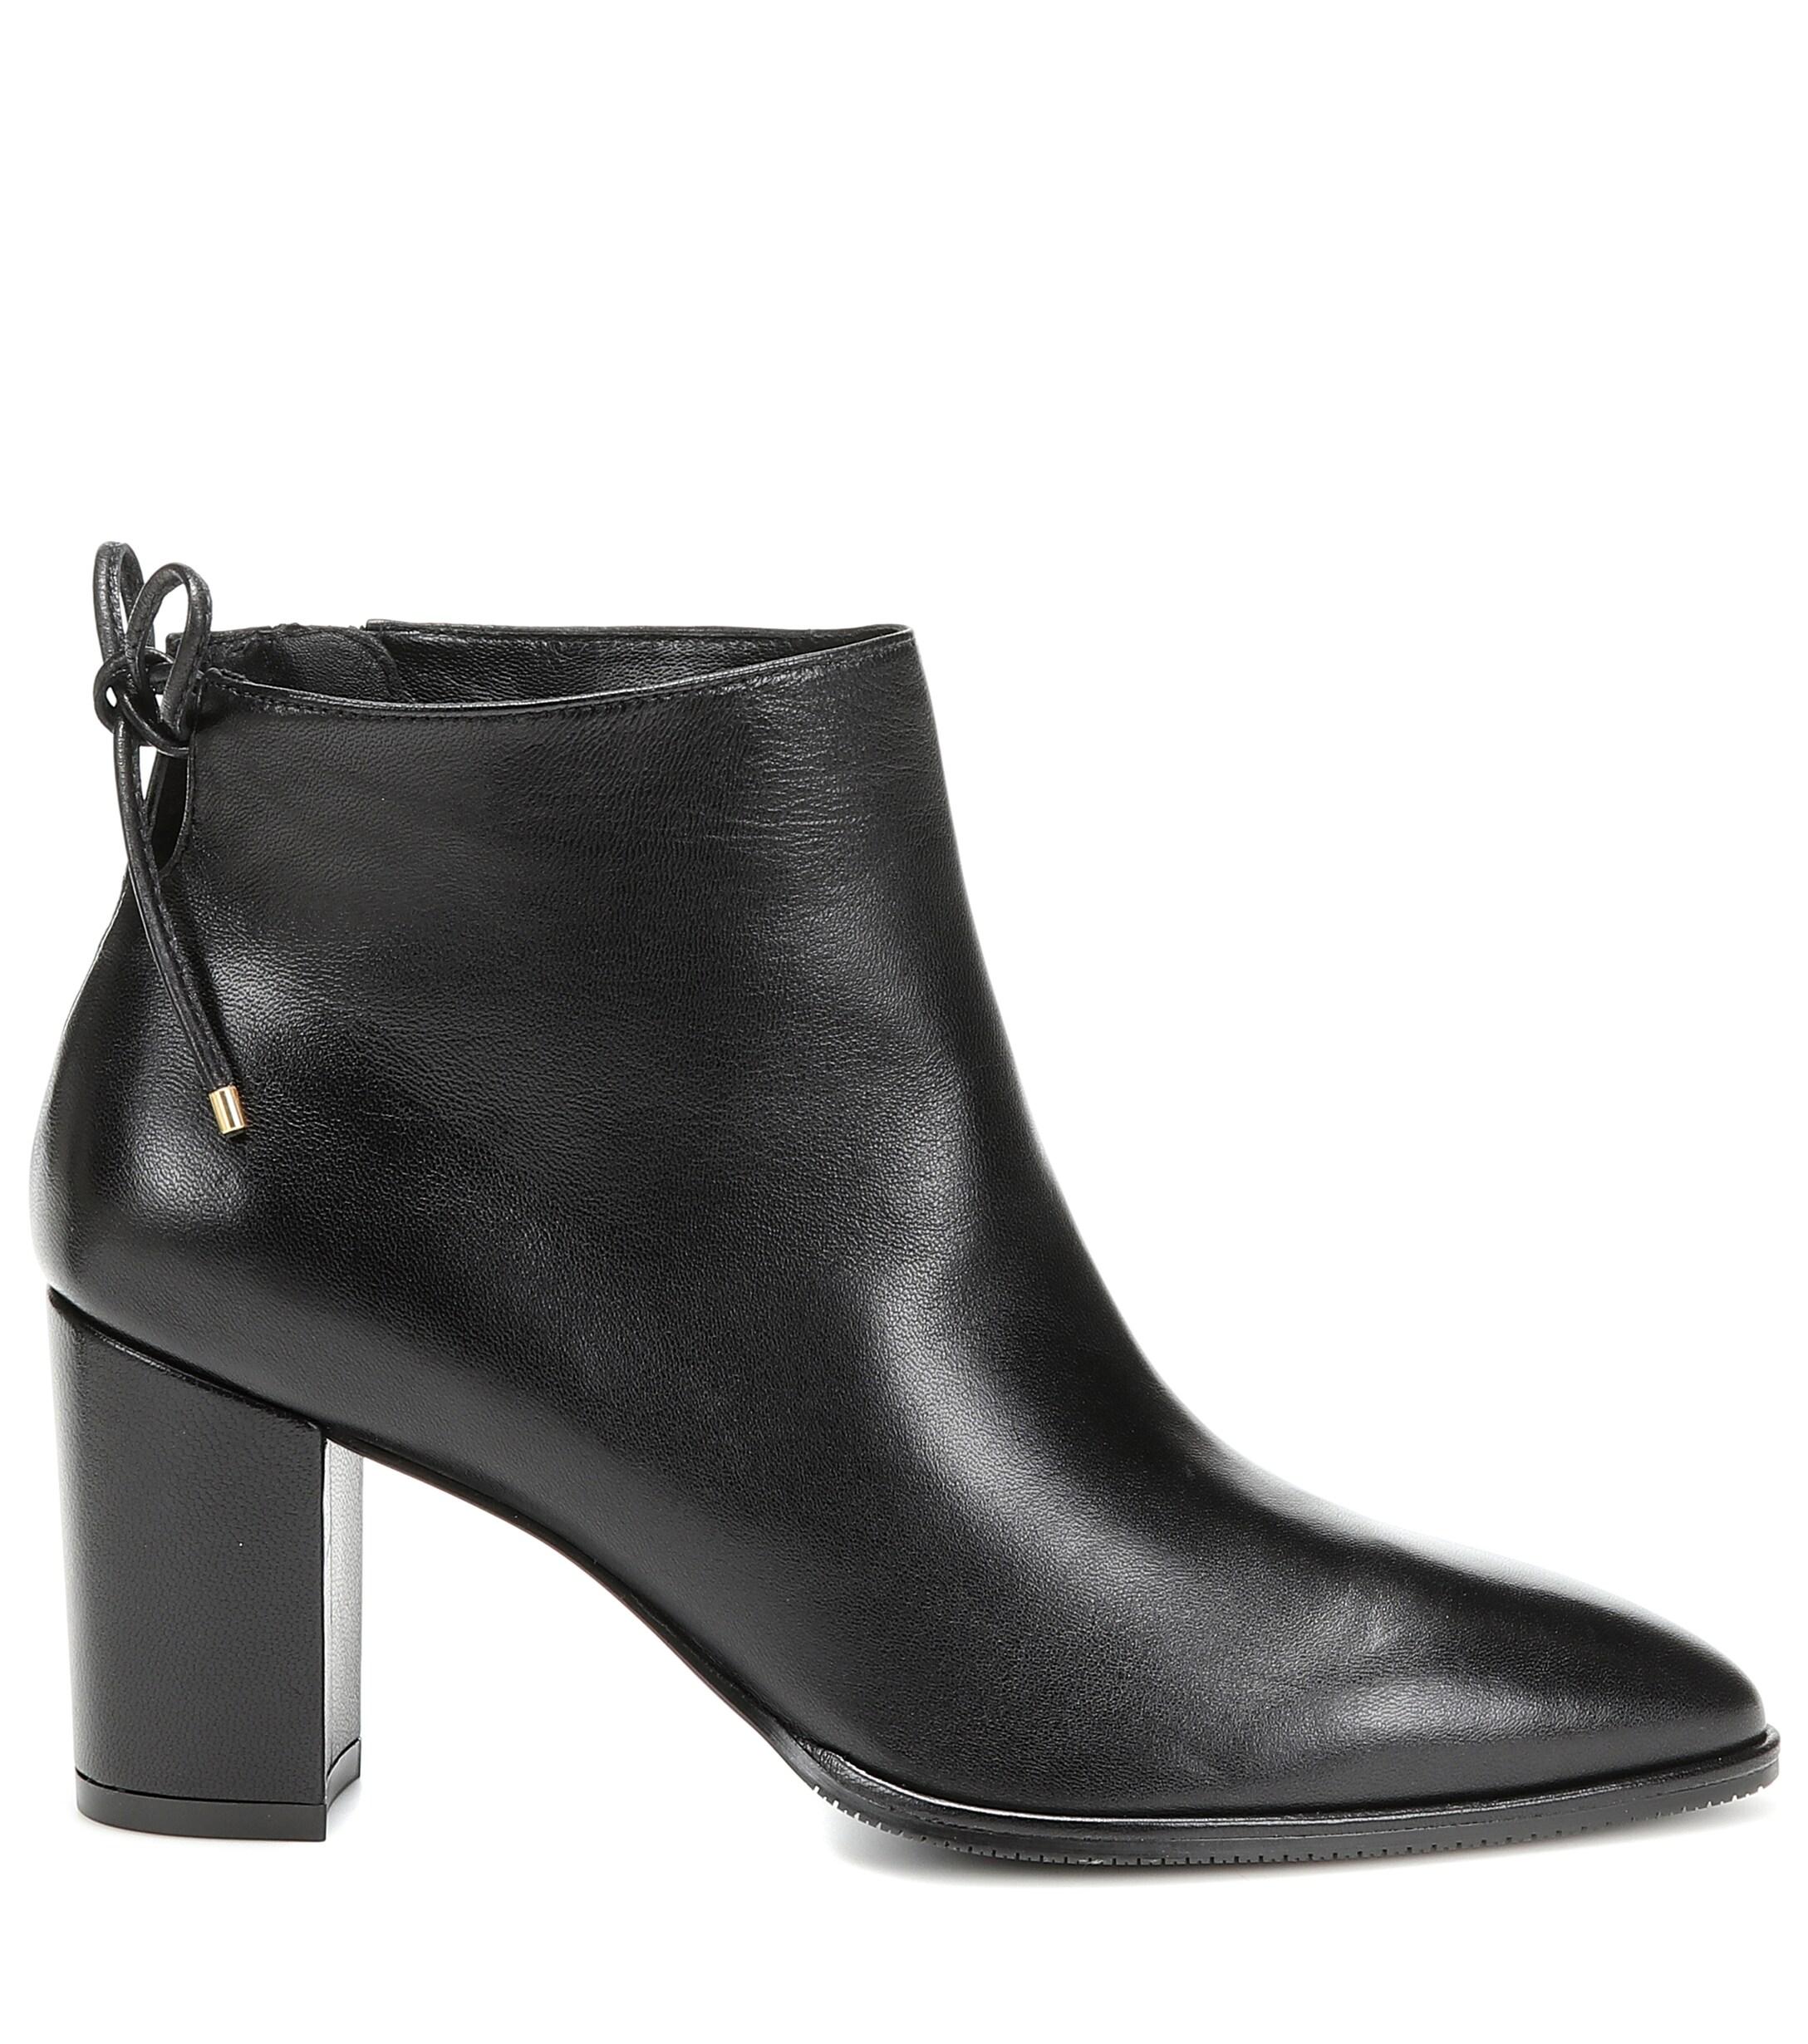 Stuart Weitzman Leather Gardiner Ankle Boots in Black Leather 